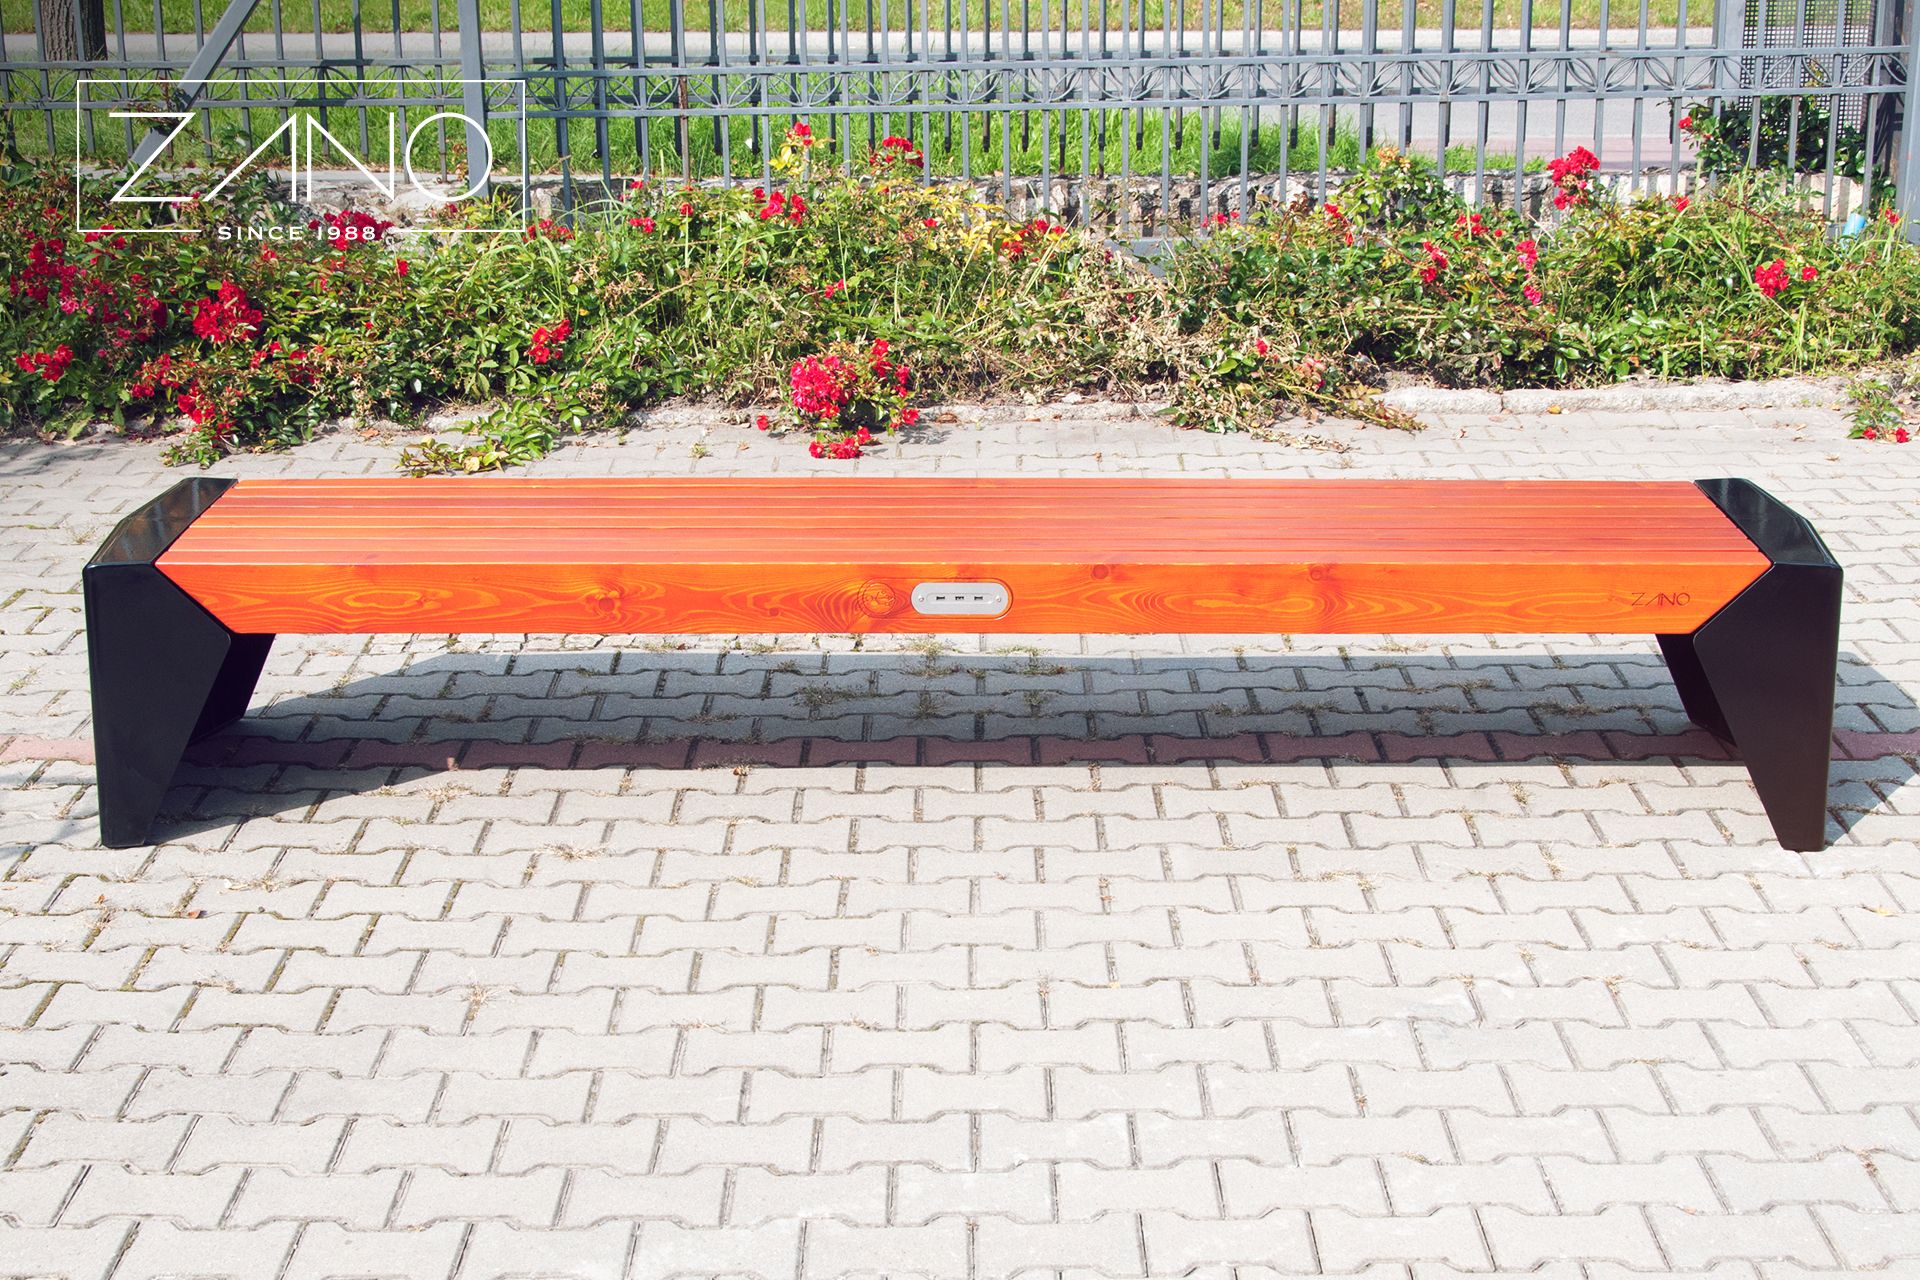 Urban bench with USB panel for charging mobile devices